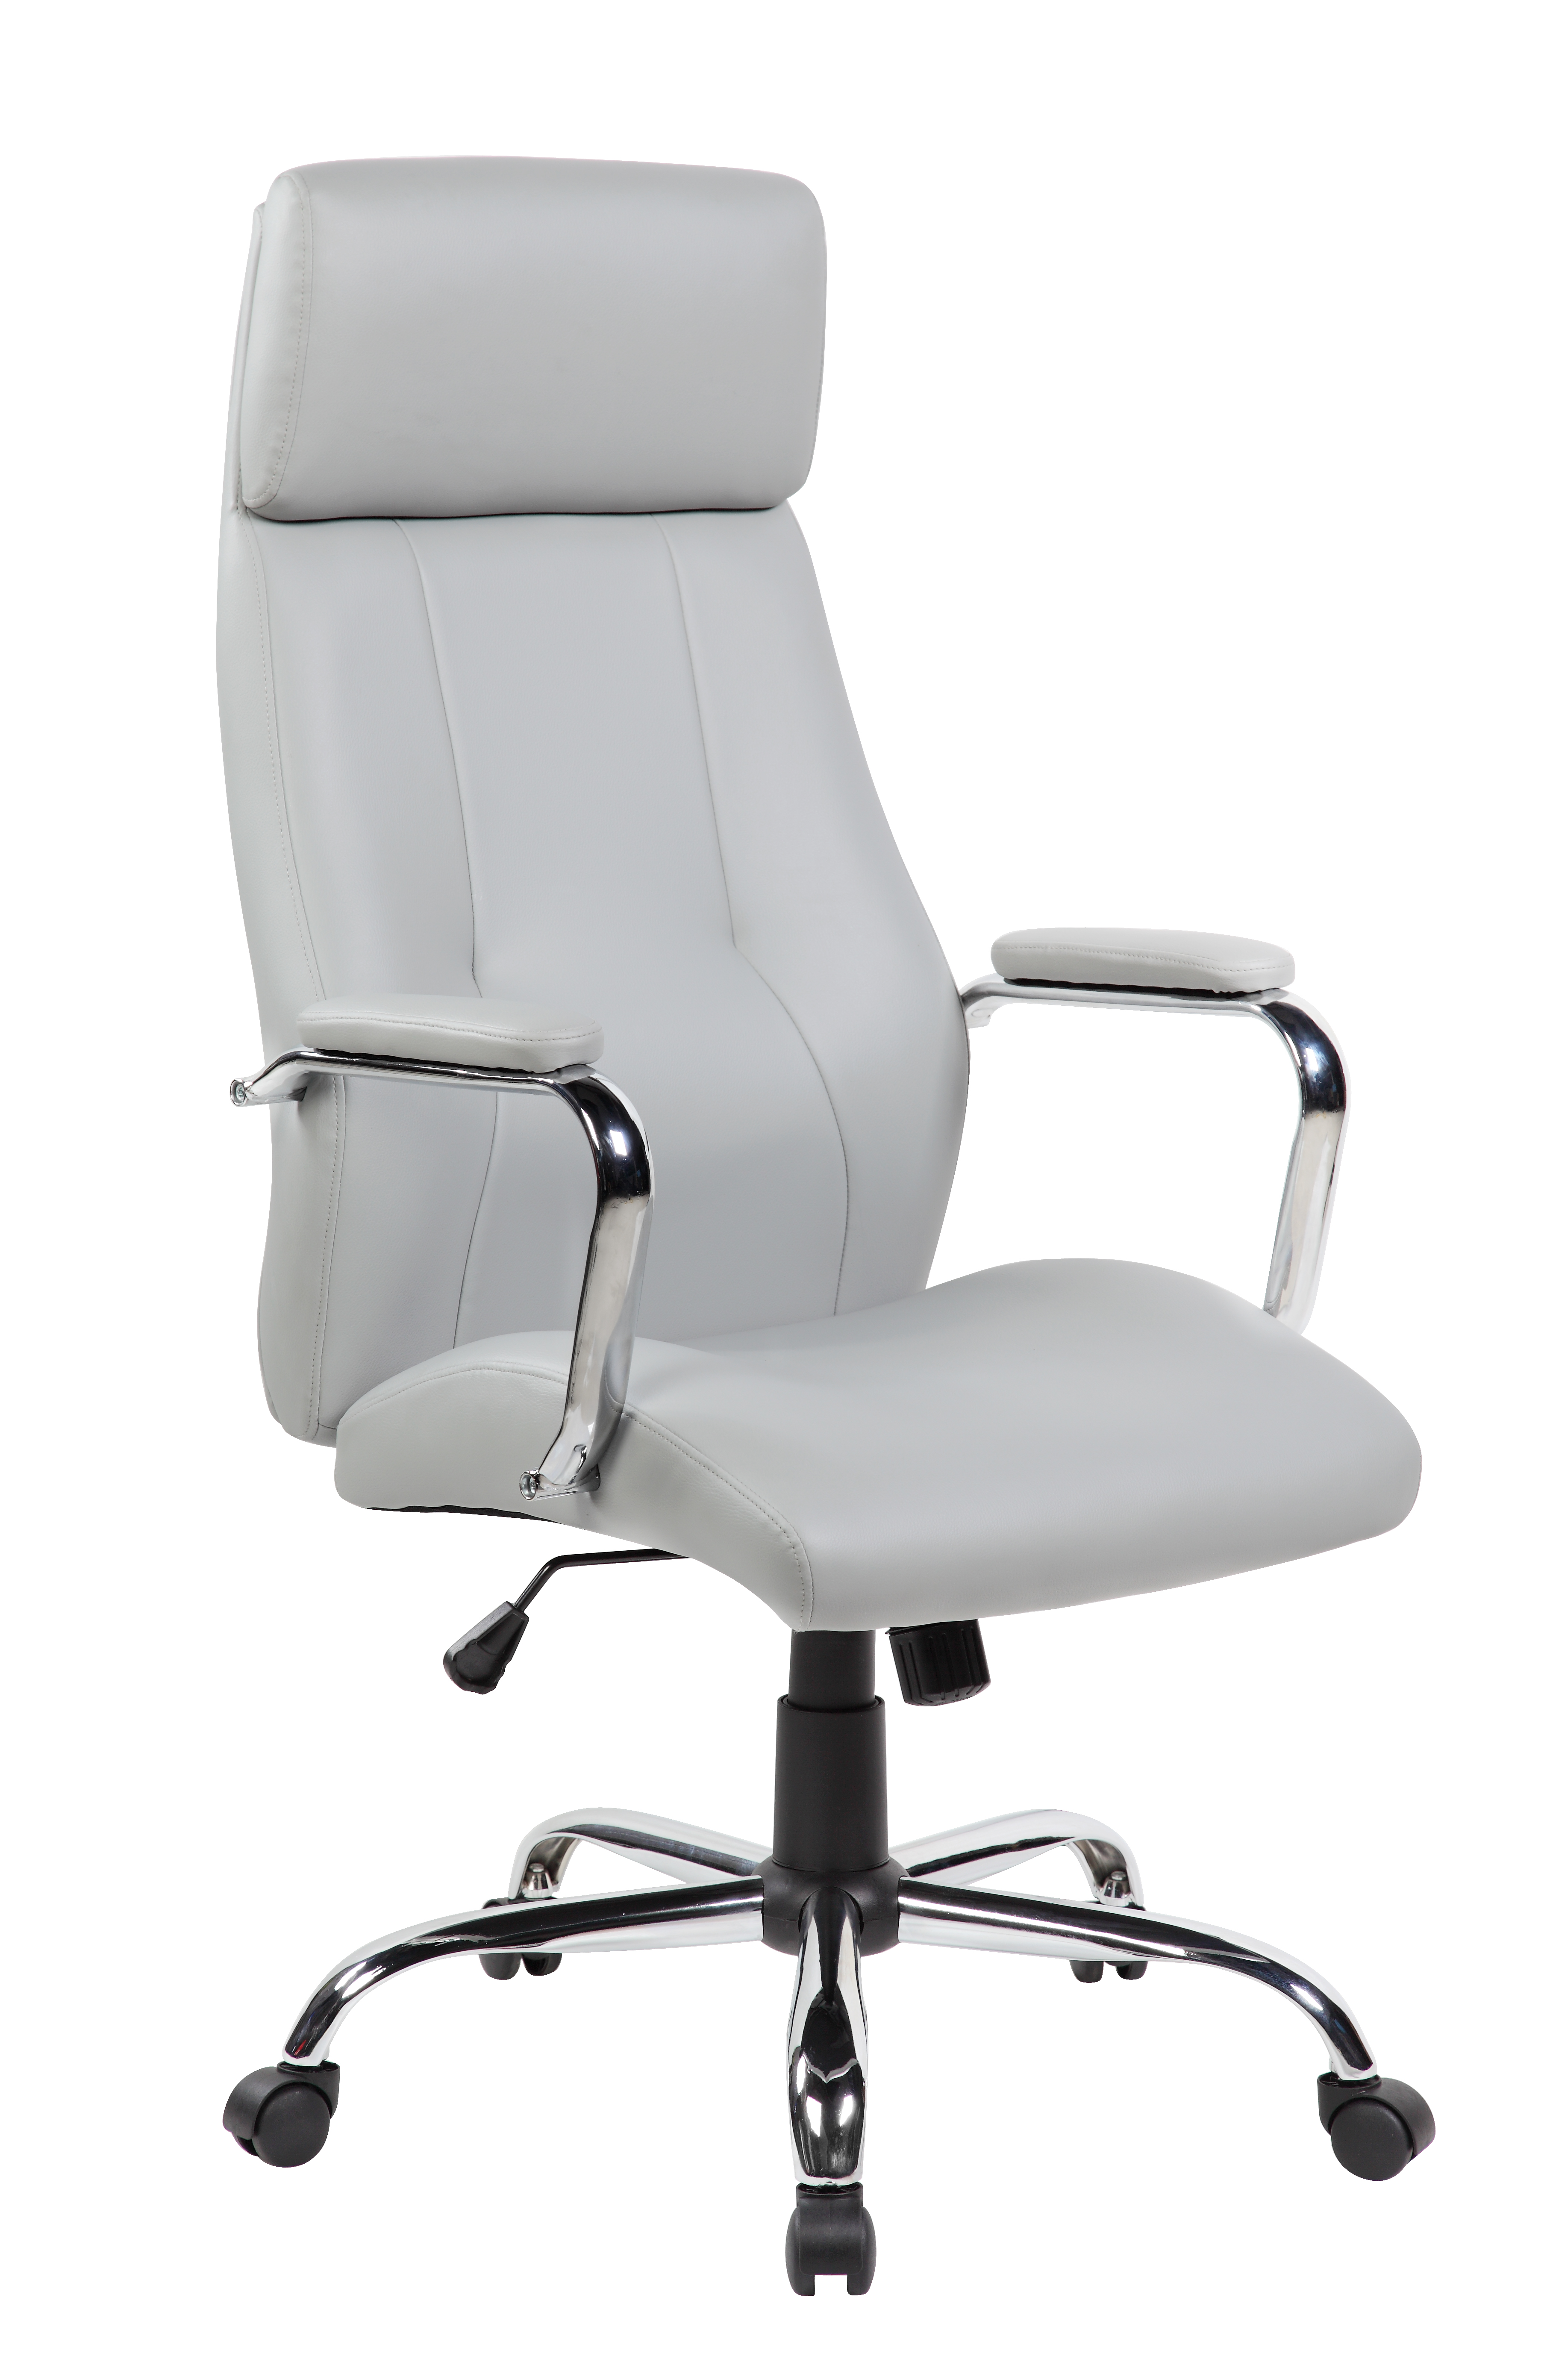 GOOSE MANAGERIAL OFFICE CHAIR